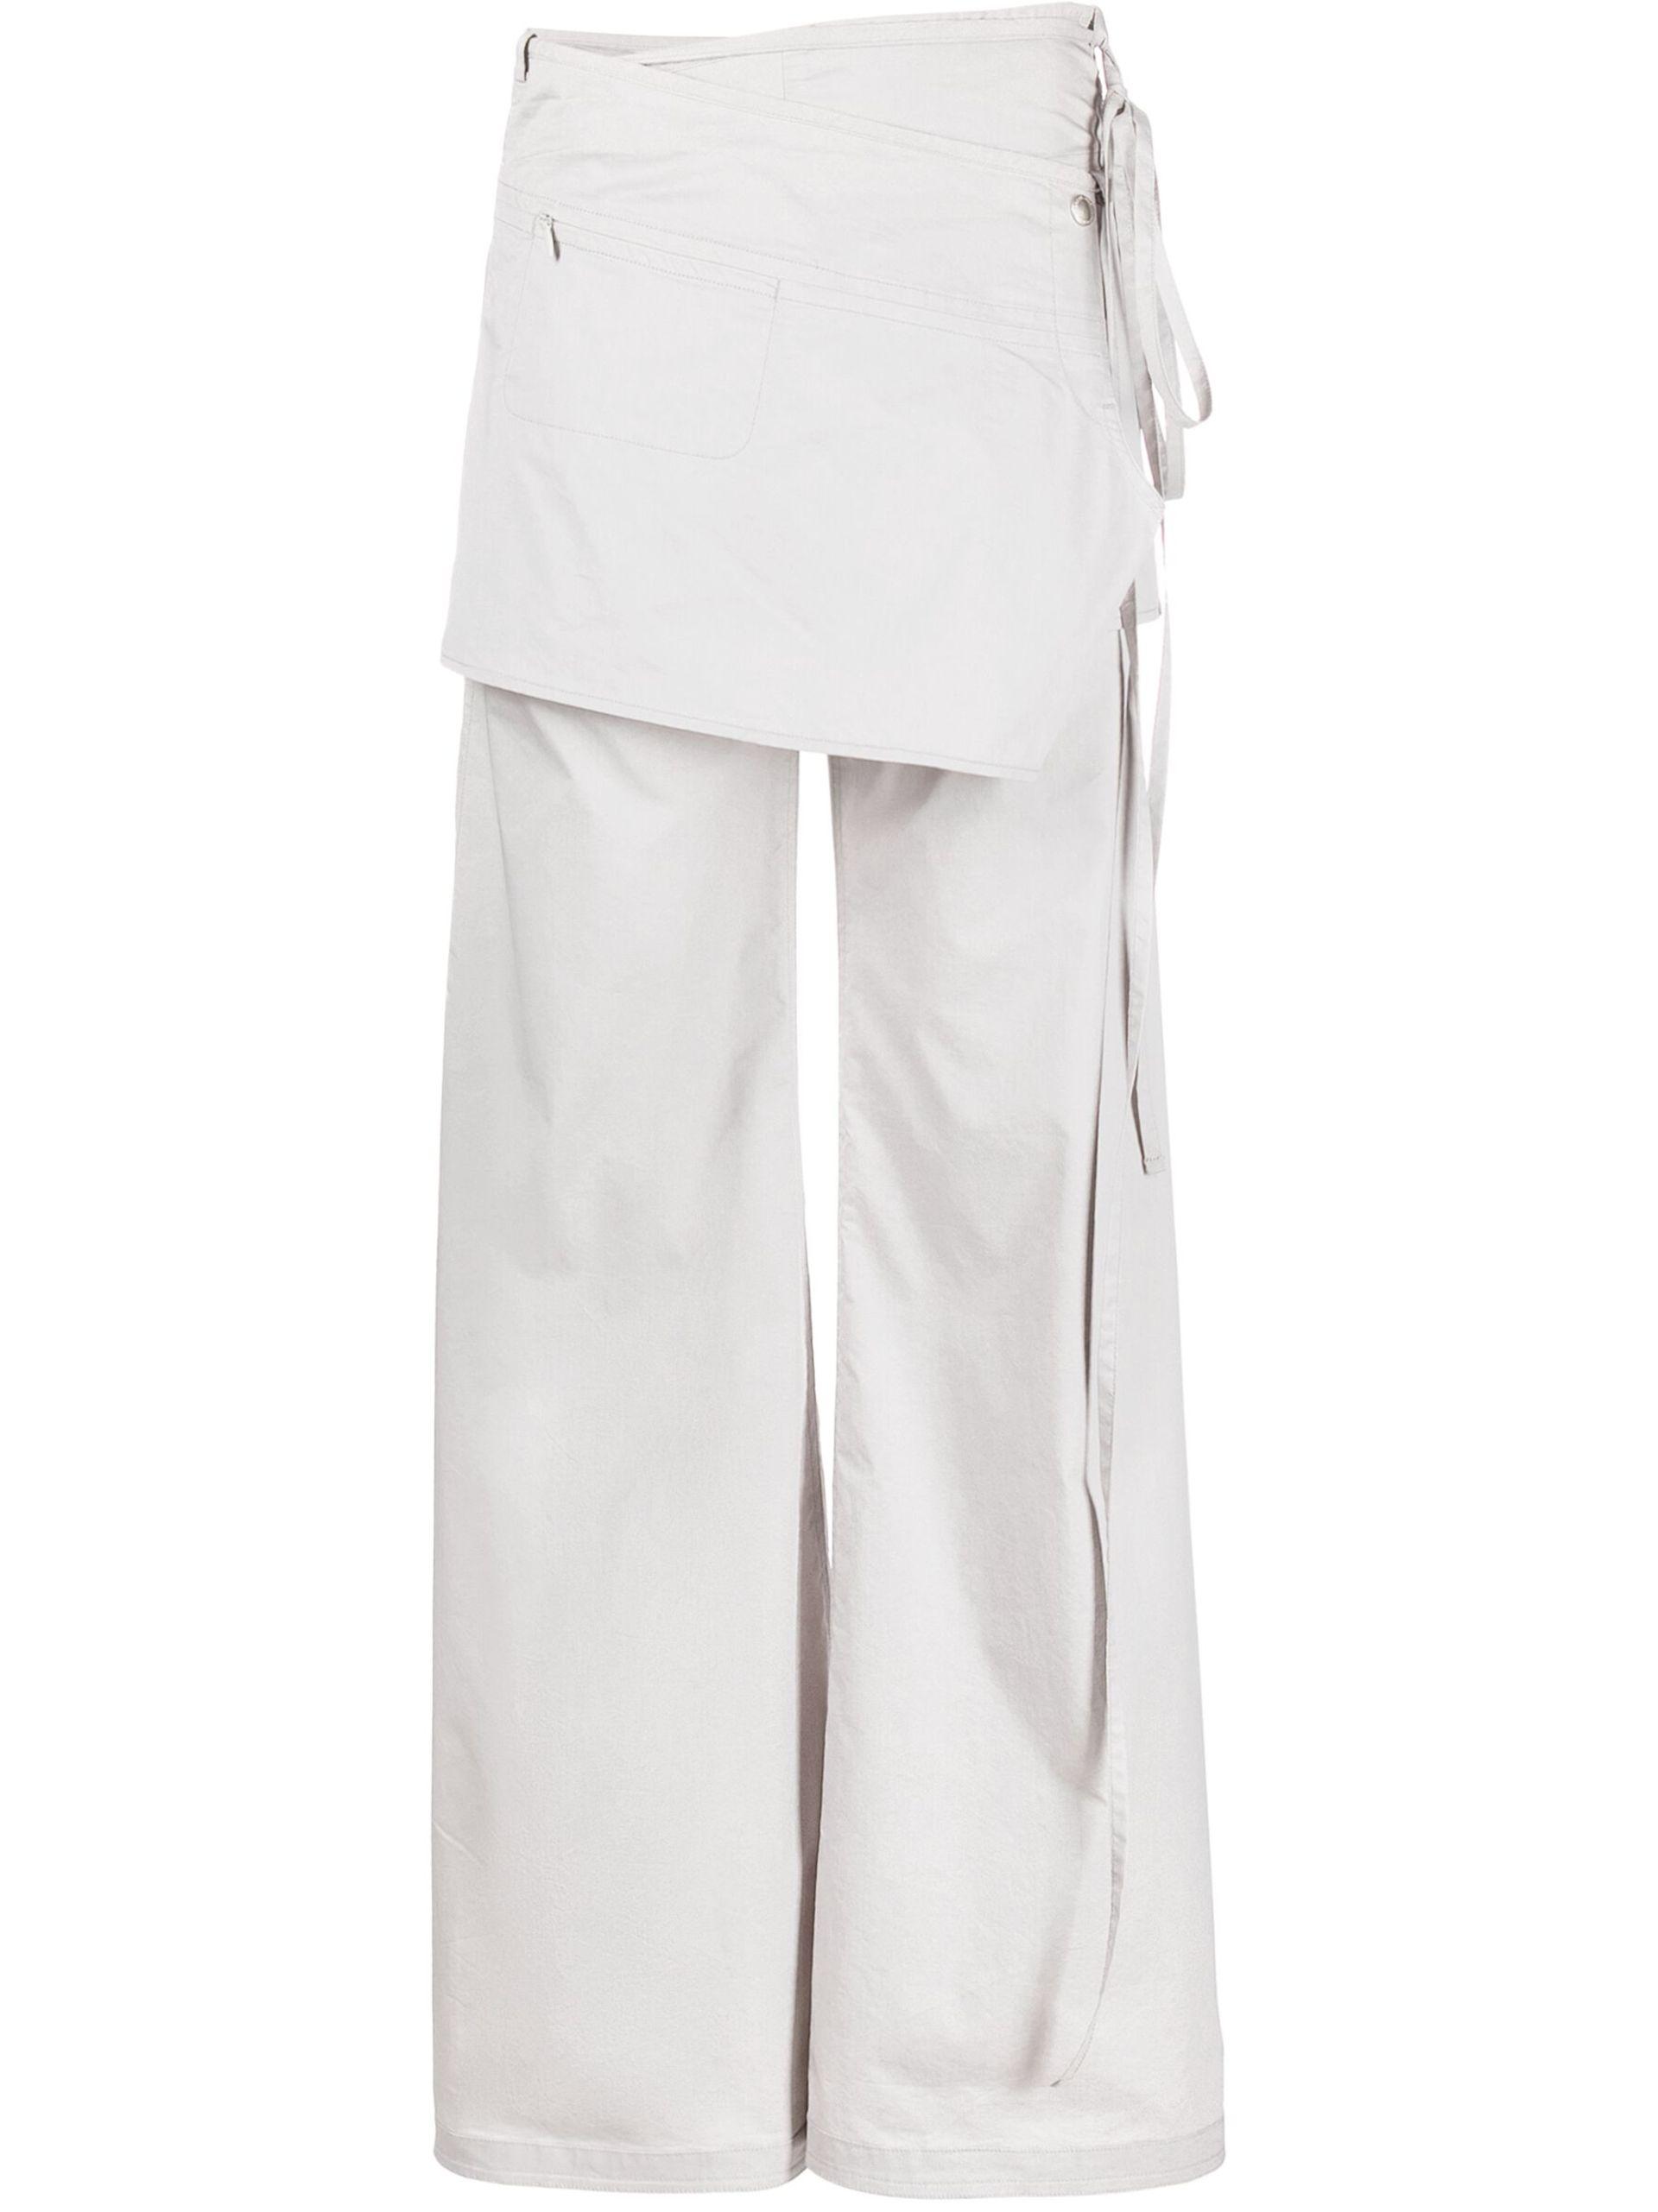 Low Classic Layered Wrap Skirt Trousers in White